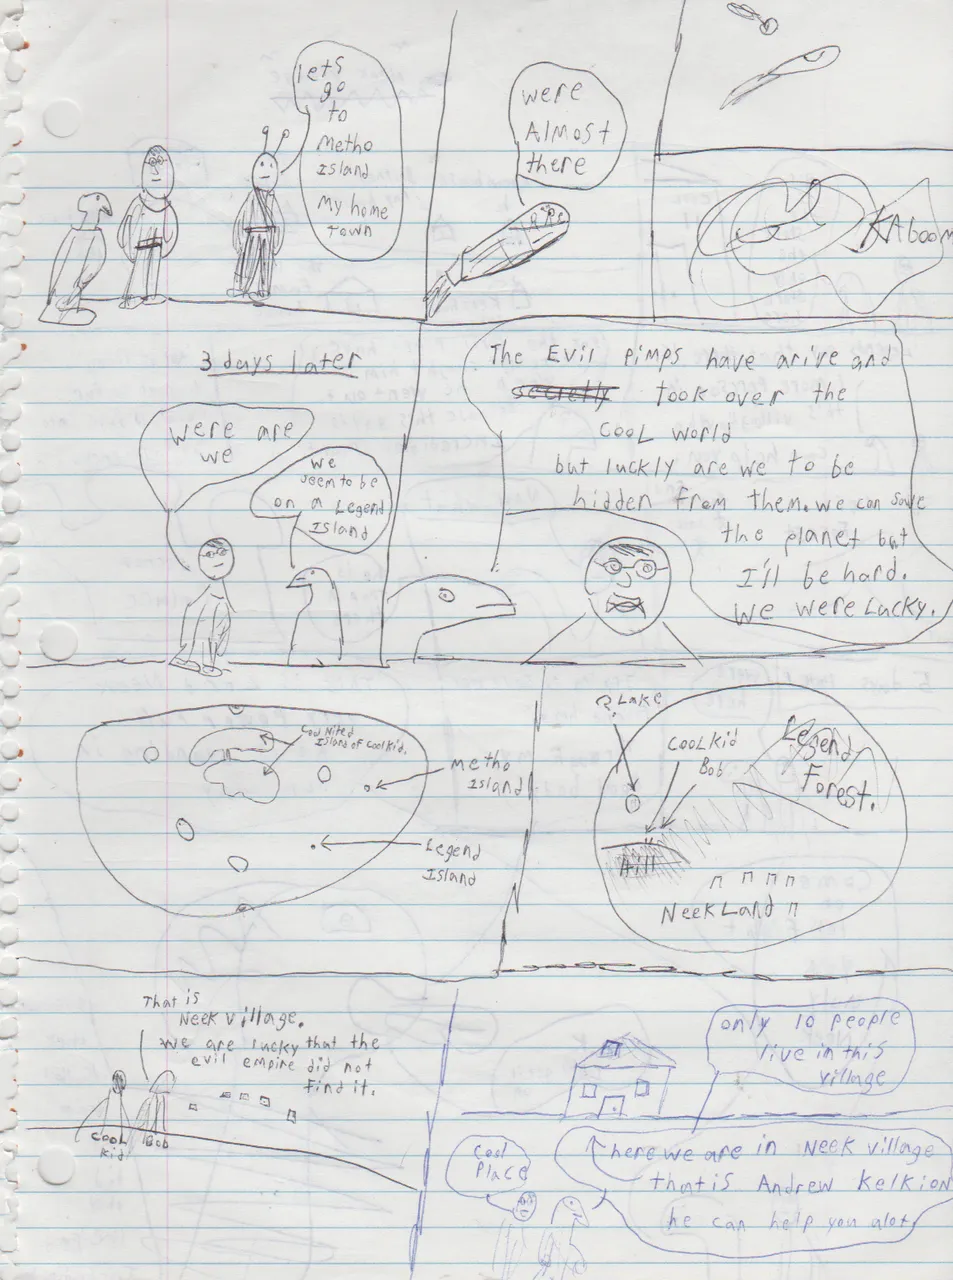 2000 maybe - Story of Action Strip featuring Sparky, Jimmy, Cool Kid, Elder, etc-09.png